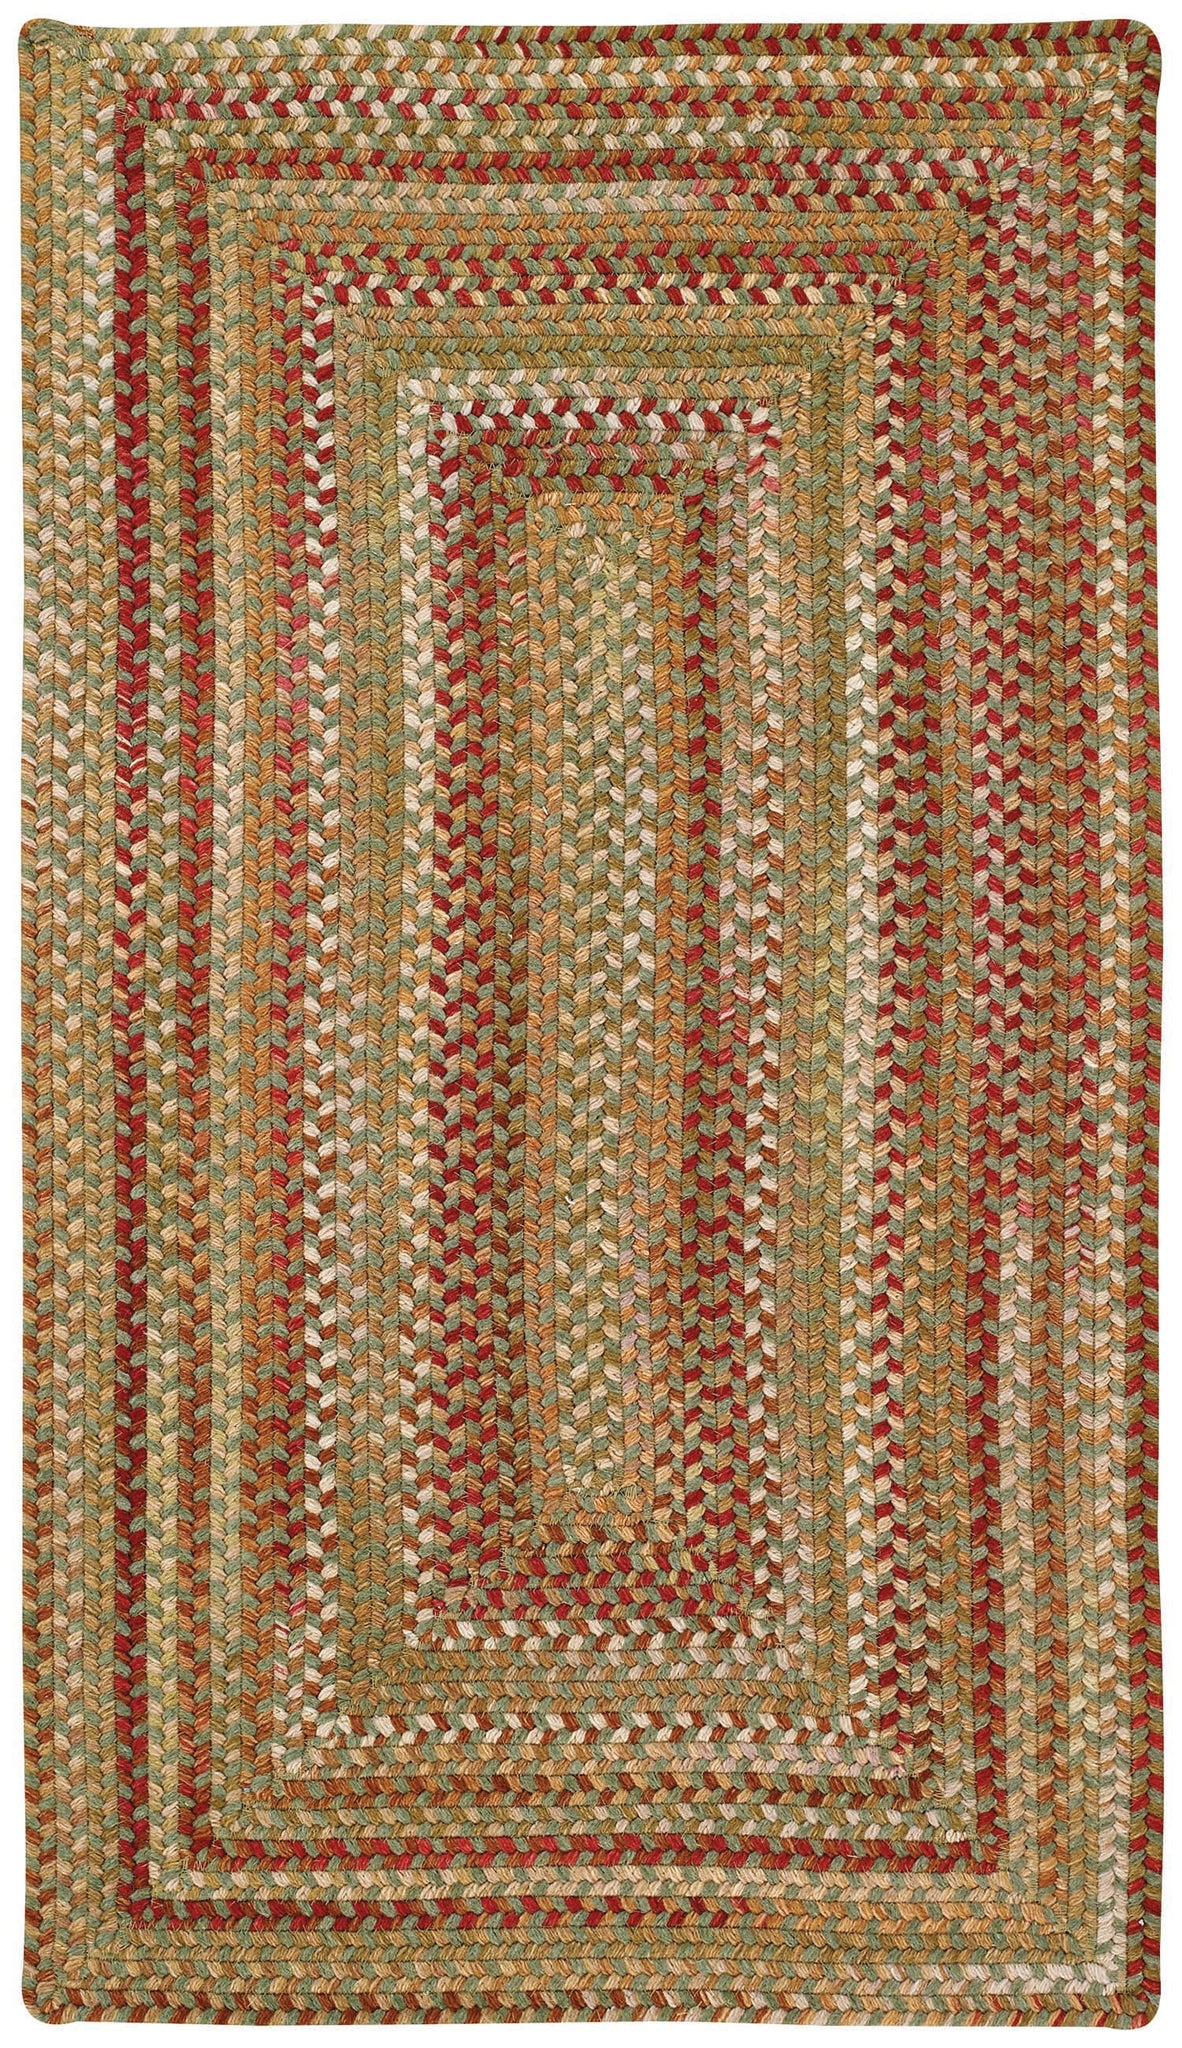 Capel Manchester 0048 Sage Red Hues 200 Area Rug main image